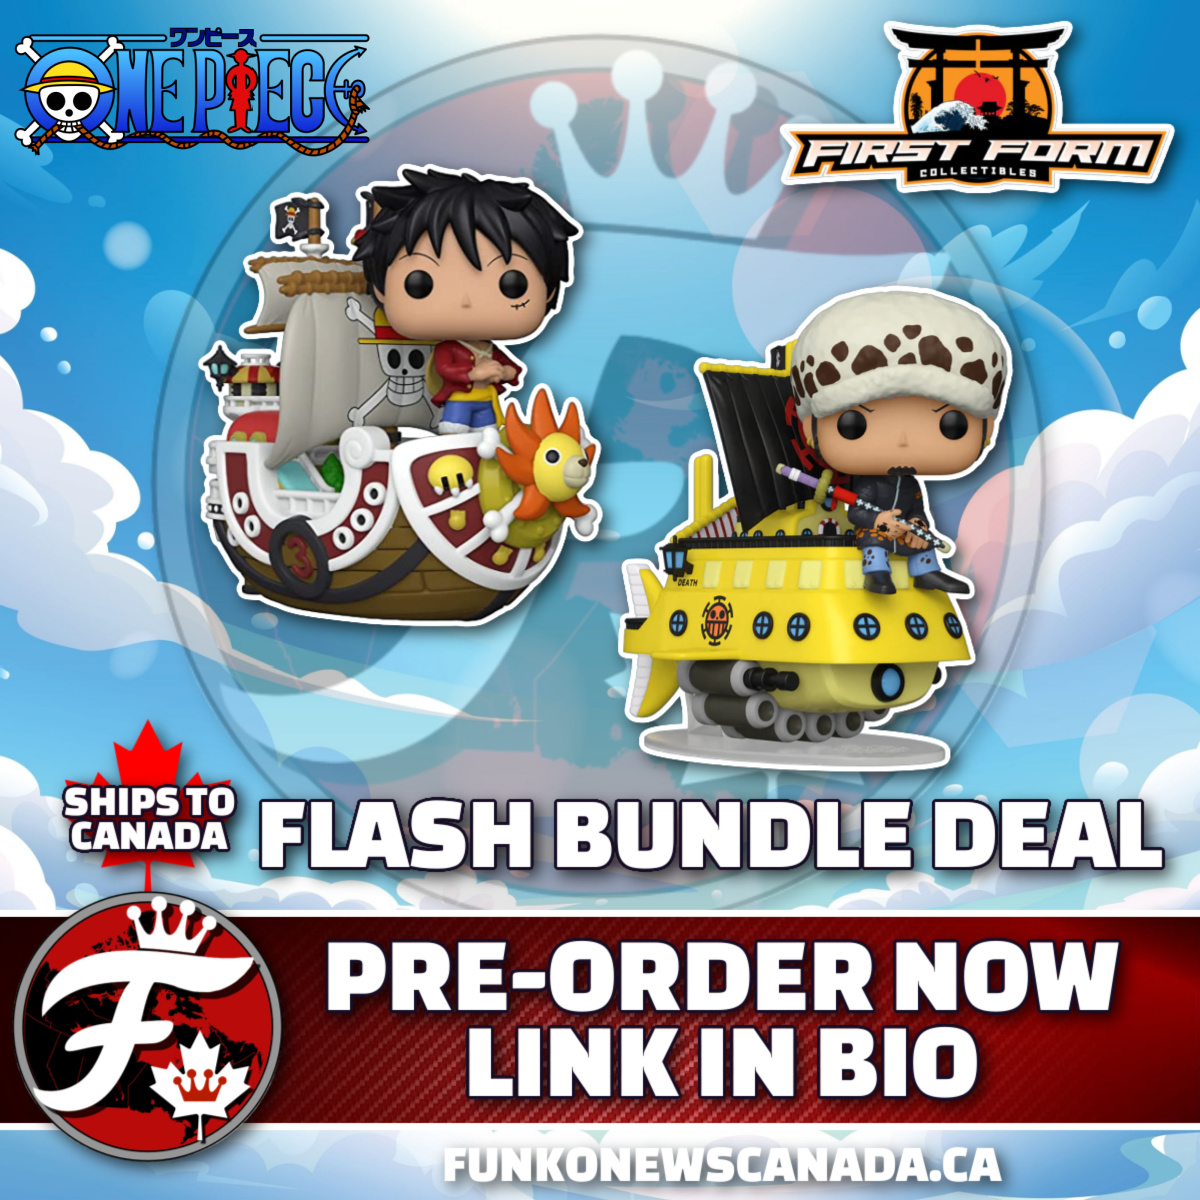 Surprise Flash Sale From First Form - Link in Bio (Instagram) Learn More (Facebook)

Funko Pop! One Piece Bundle

bit.ly/43uLQuP

#nerdlife #vinylfigures #funkocommunity #funkocollector #toycommunity #collectibles #geeklife #popculture #funkofanatic #funkofamily…